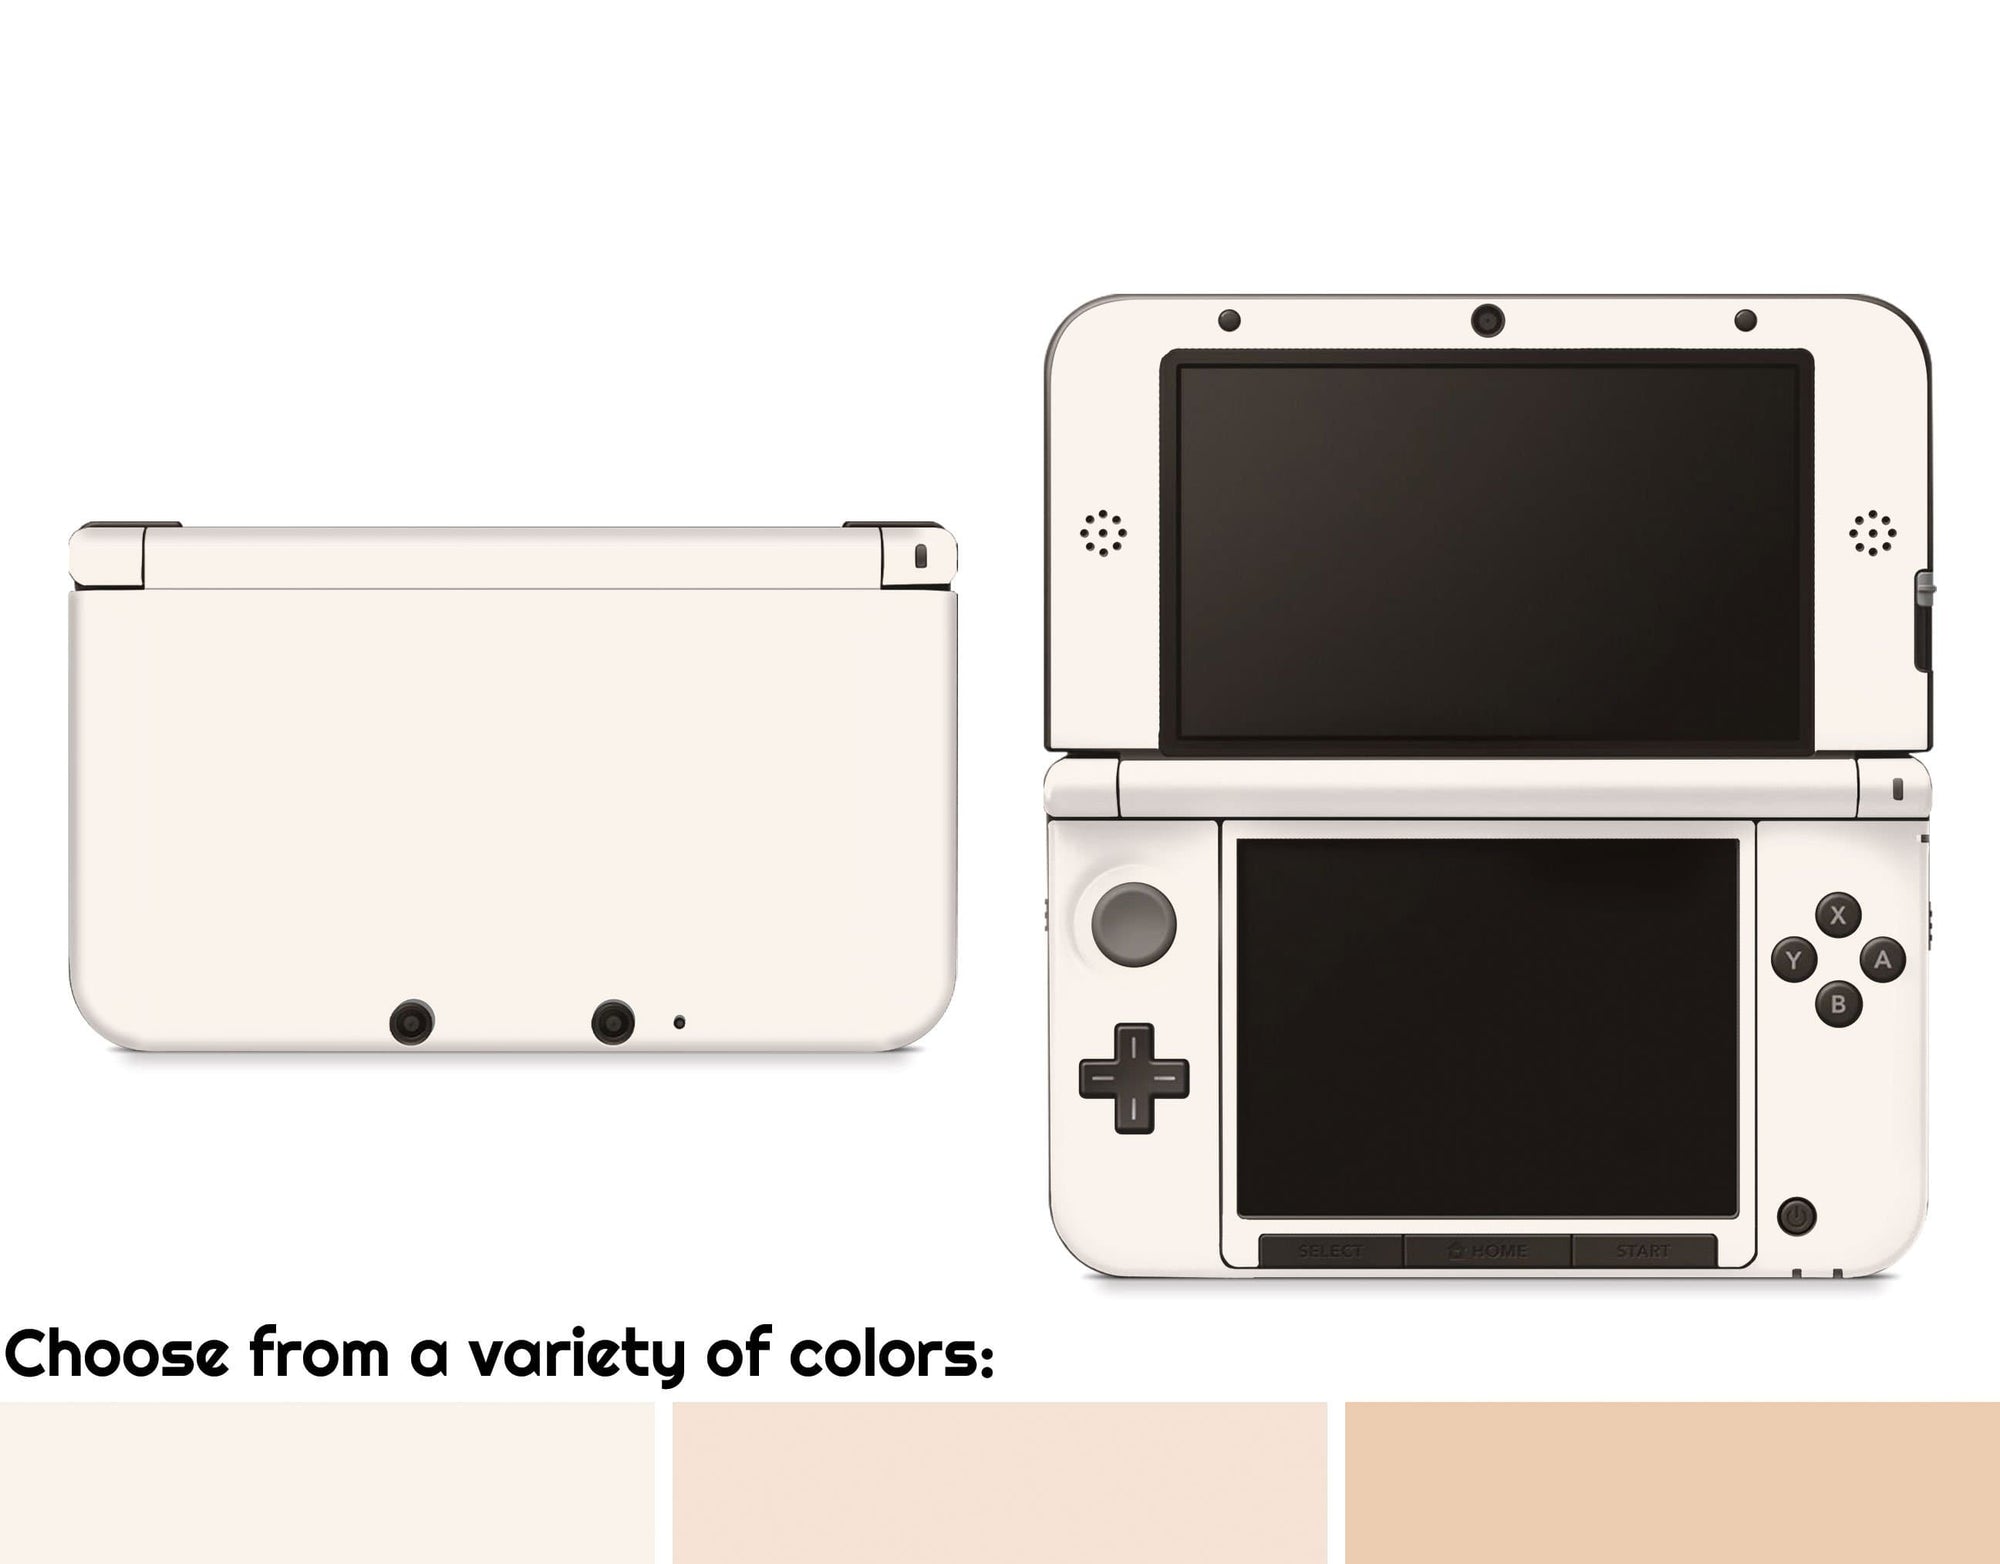 nintendo 3ds colors available